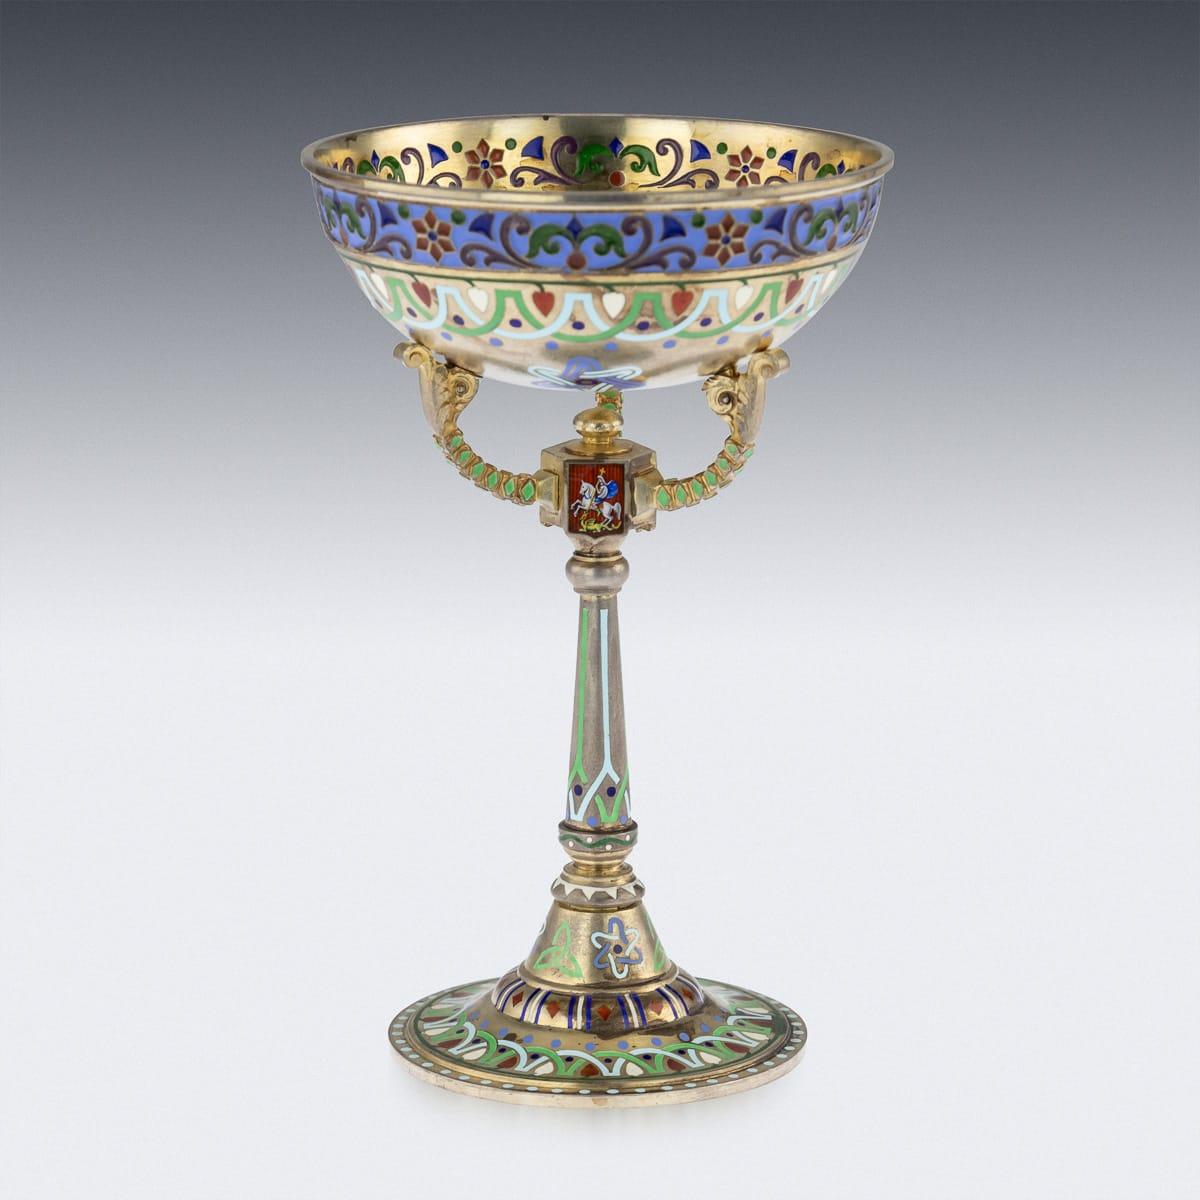 Antique early 20th century Russian solid silver-gilt sherbet cup on stand, decorated with plique-à-jour enamel rim and guilloché enamel interior, supported by three foliate and beaded arms rising from a hexagonal stem enameled with coats of arms of